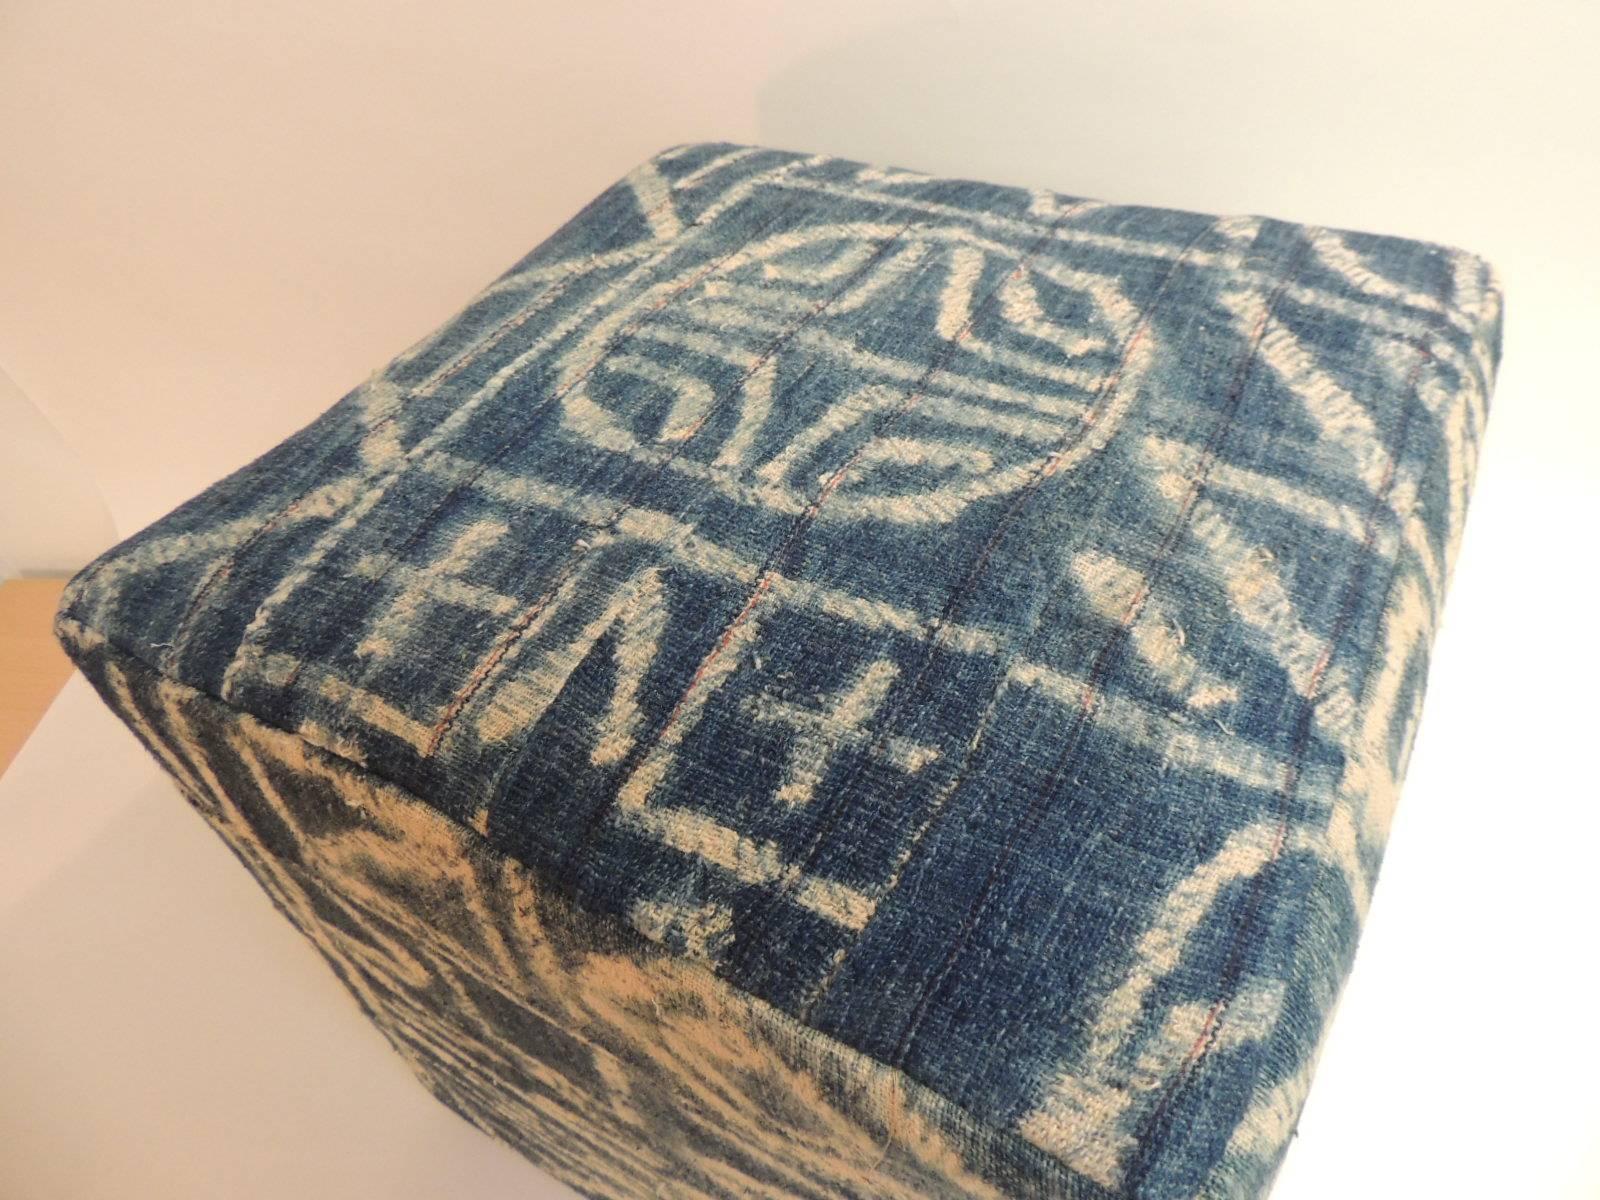 African blue and natural vintage Ndop textile upholstered square ottoman
African blue and natural vintage textile re-upholstered square ottoman custom exclusively designed by the Antique Textiles Galleries. Stripes of the African strip woven cotton